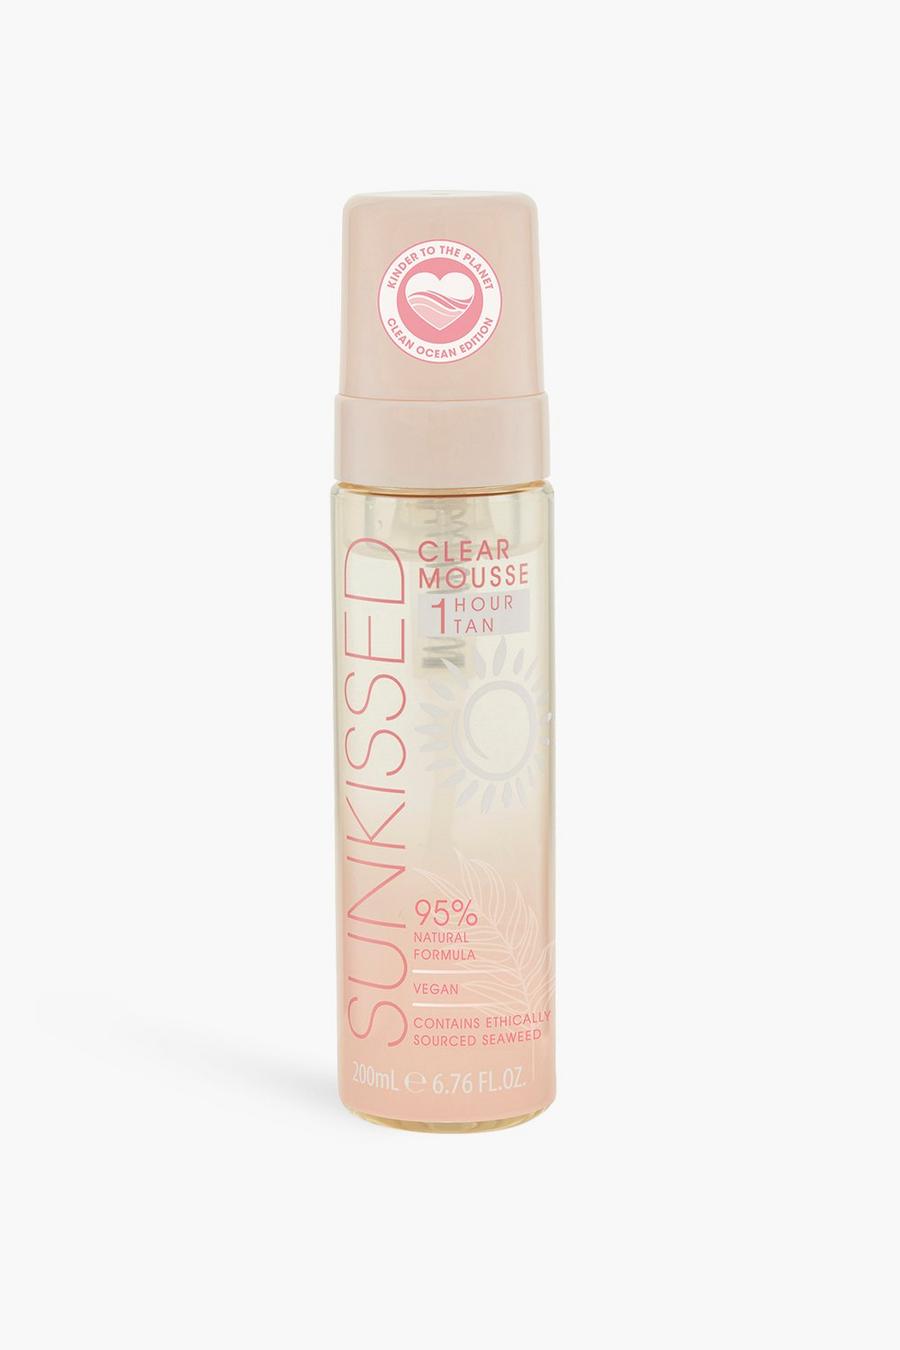 Sunkissed Clear Mousse 1 Hour Tan 200ml Clean image number 1